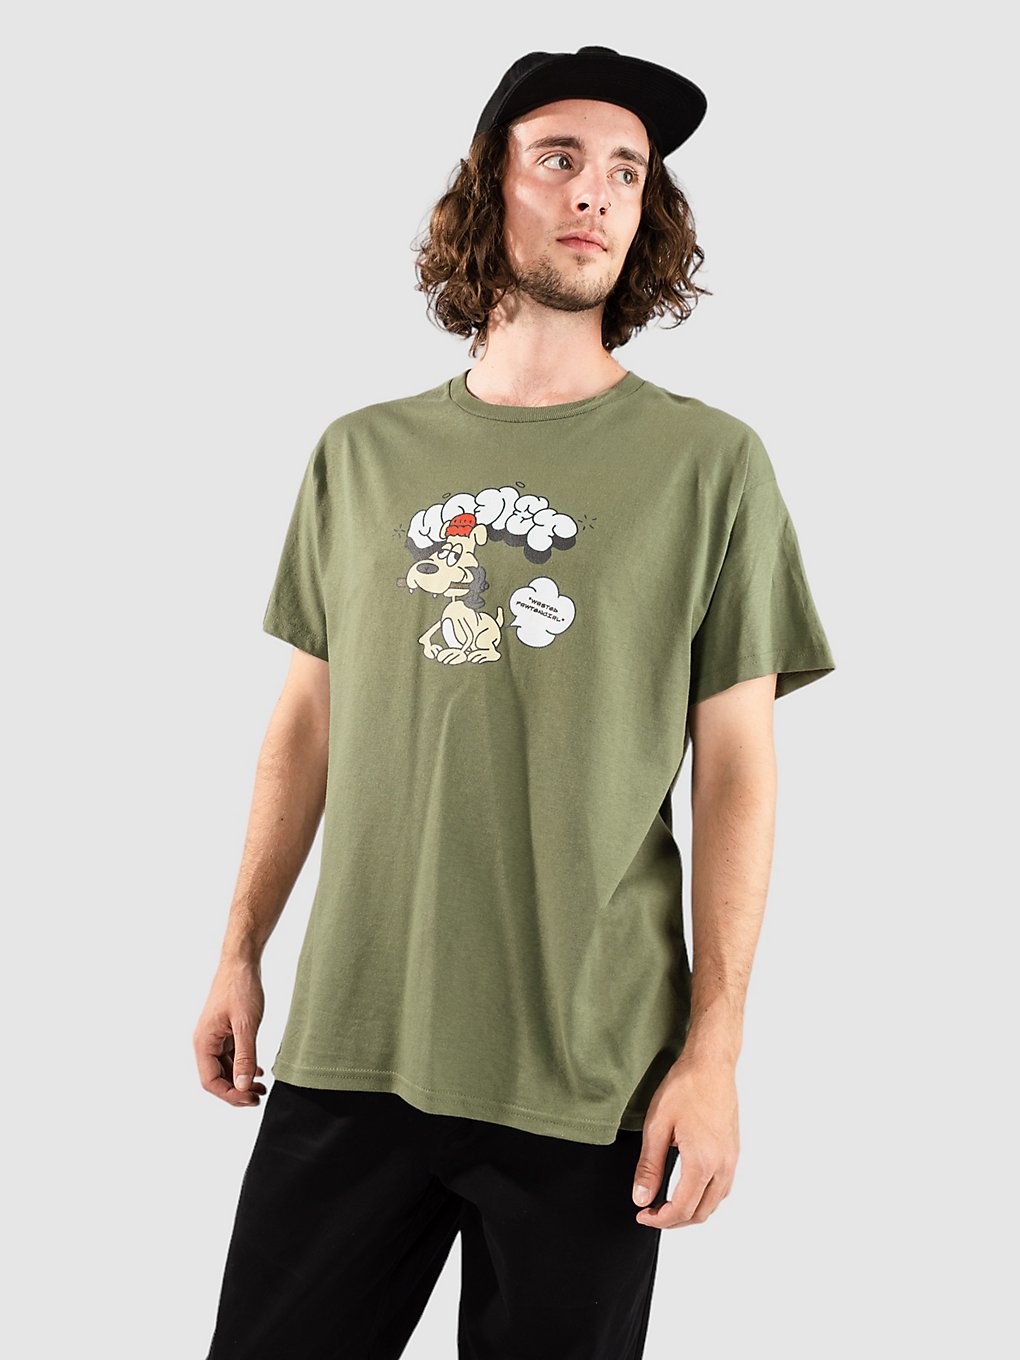 Monet Skateboards Wasted Pawtencial T-Shirt olive kaufen